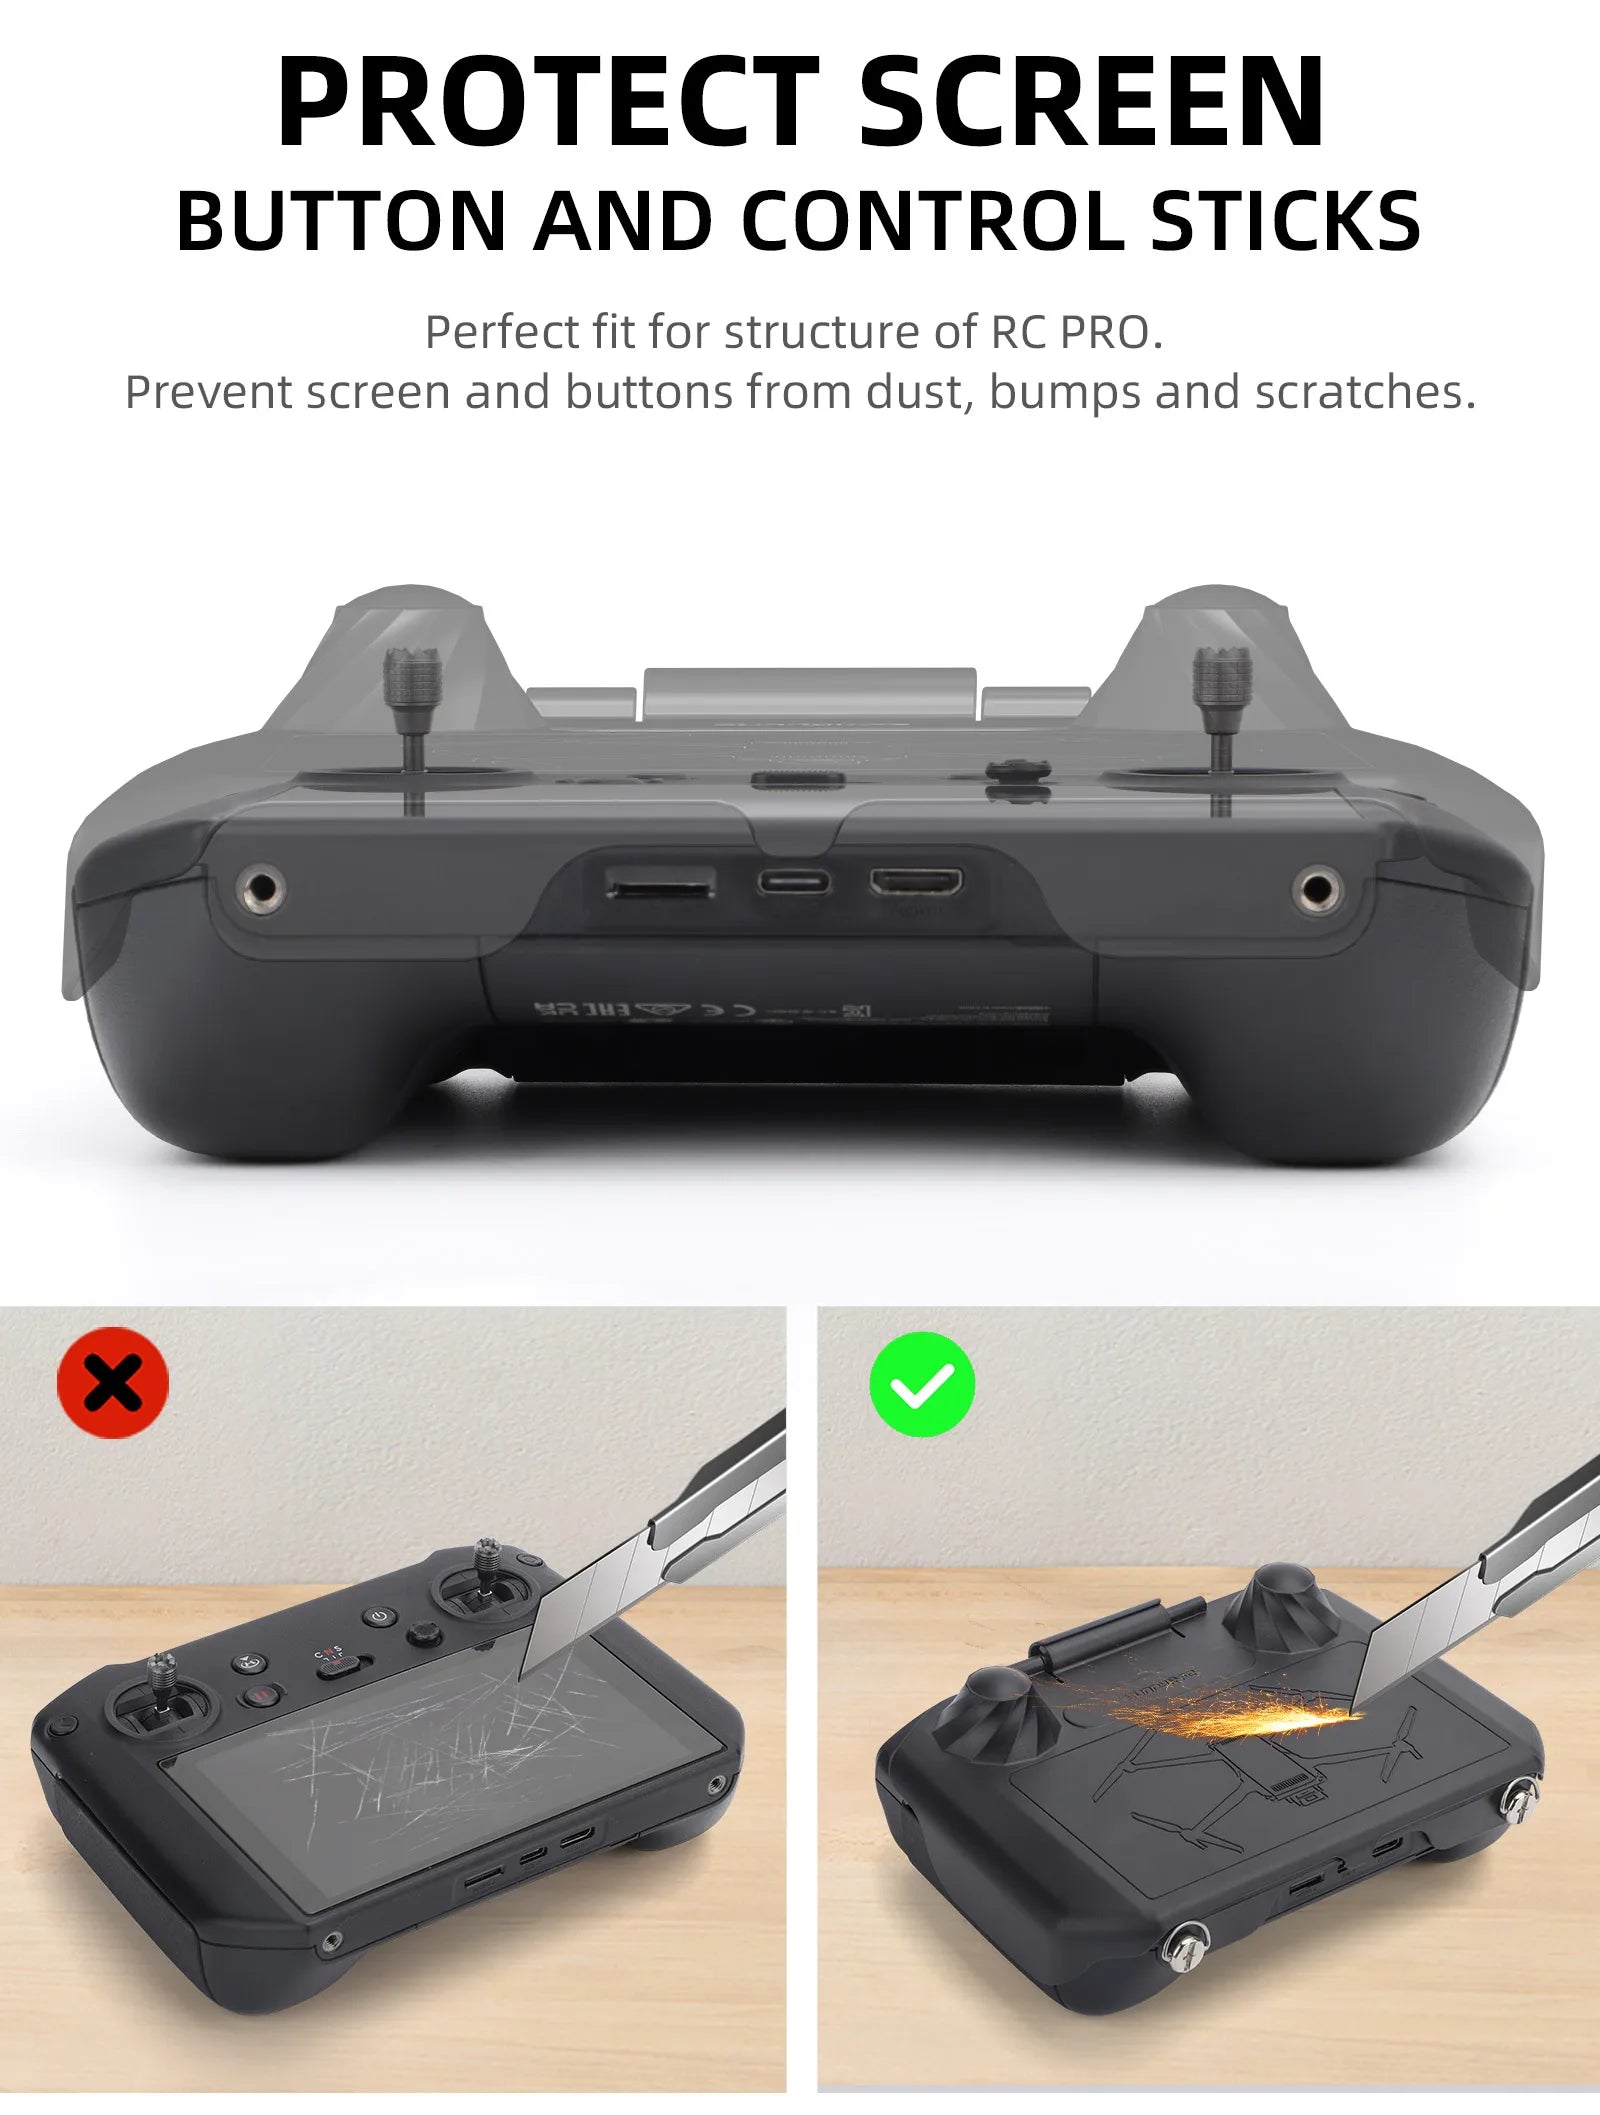 Ceima's RC PRO screen and buttons are designed to withstand dust, bump